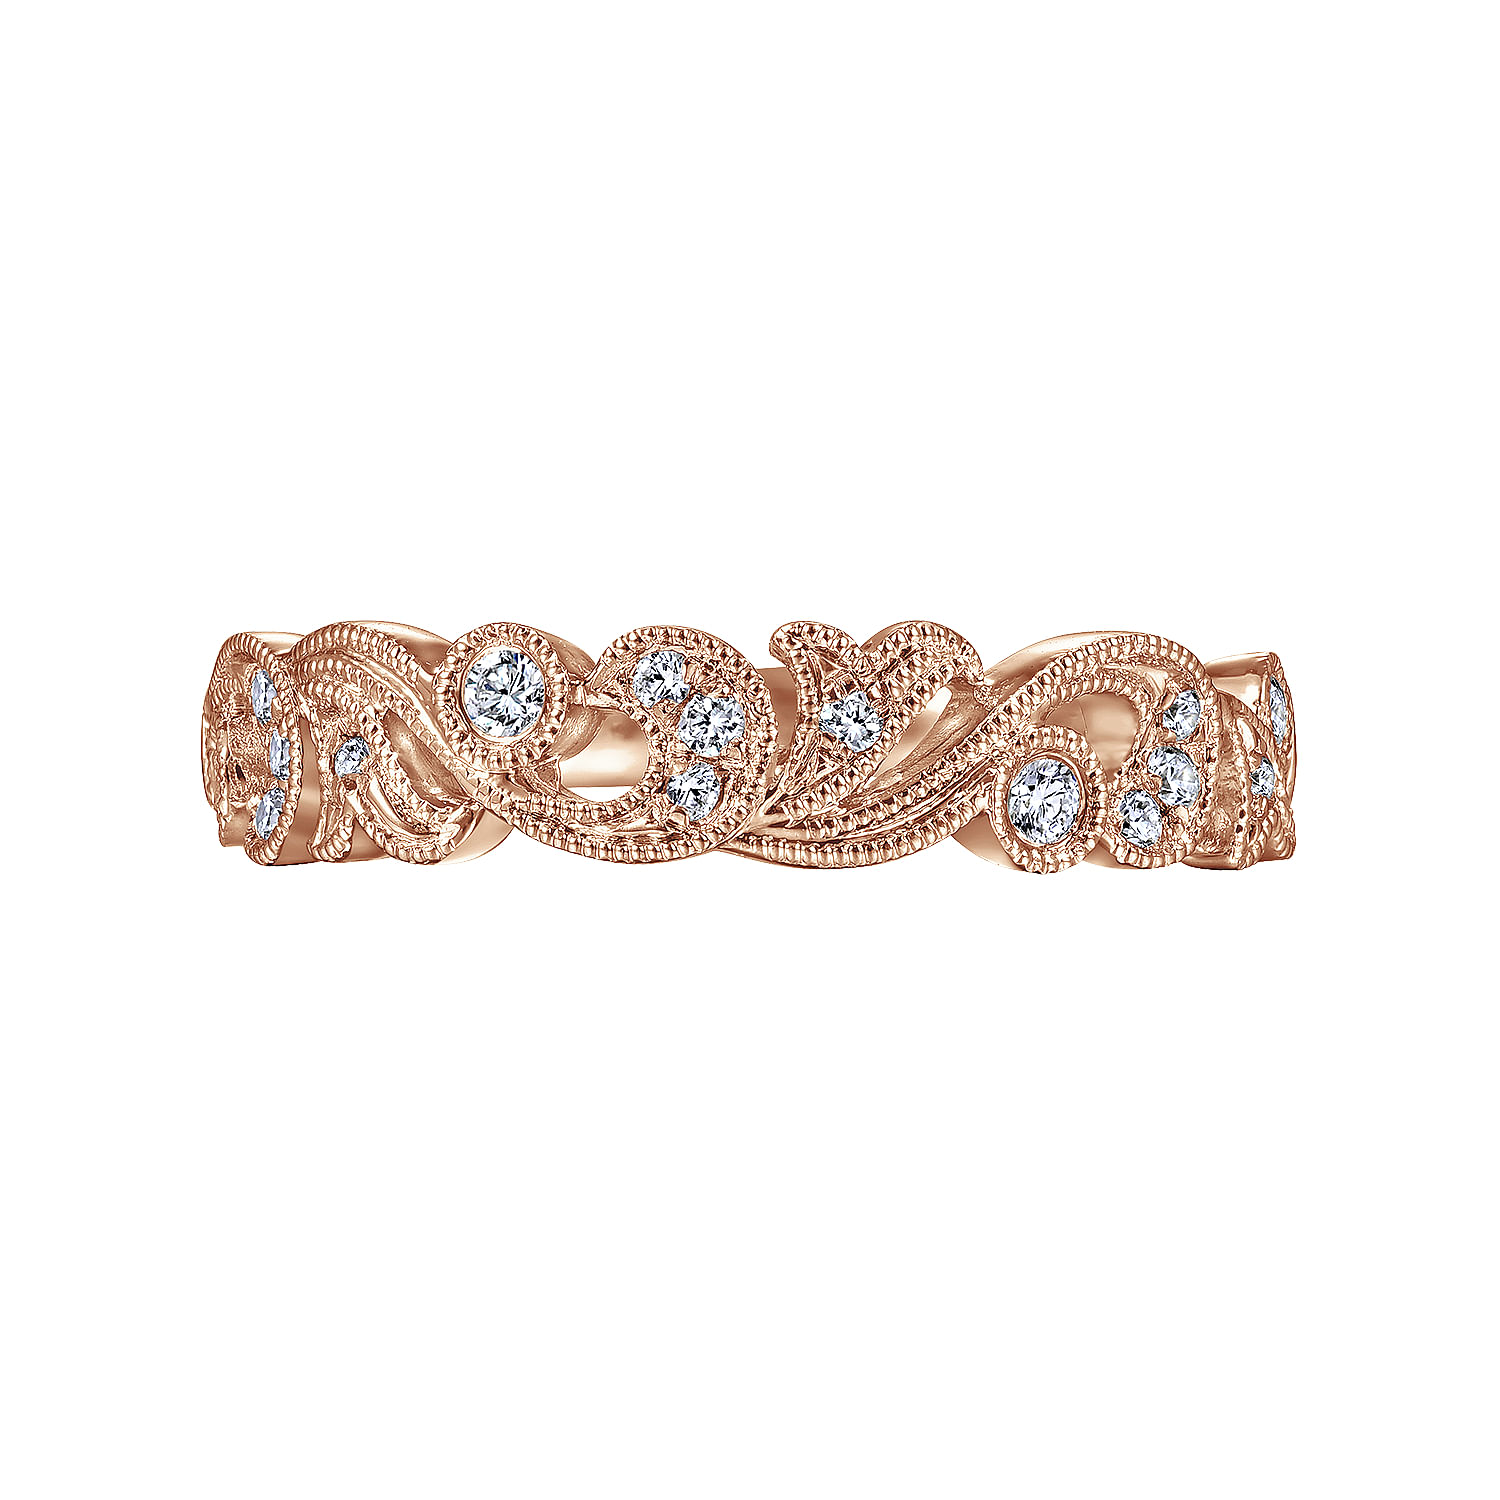 Floral 14K Rose Gold Diamond Anniversary Band with Milgrain